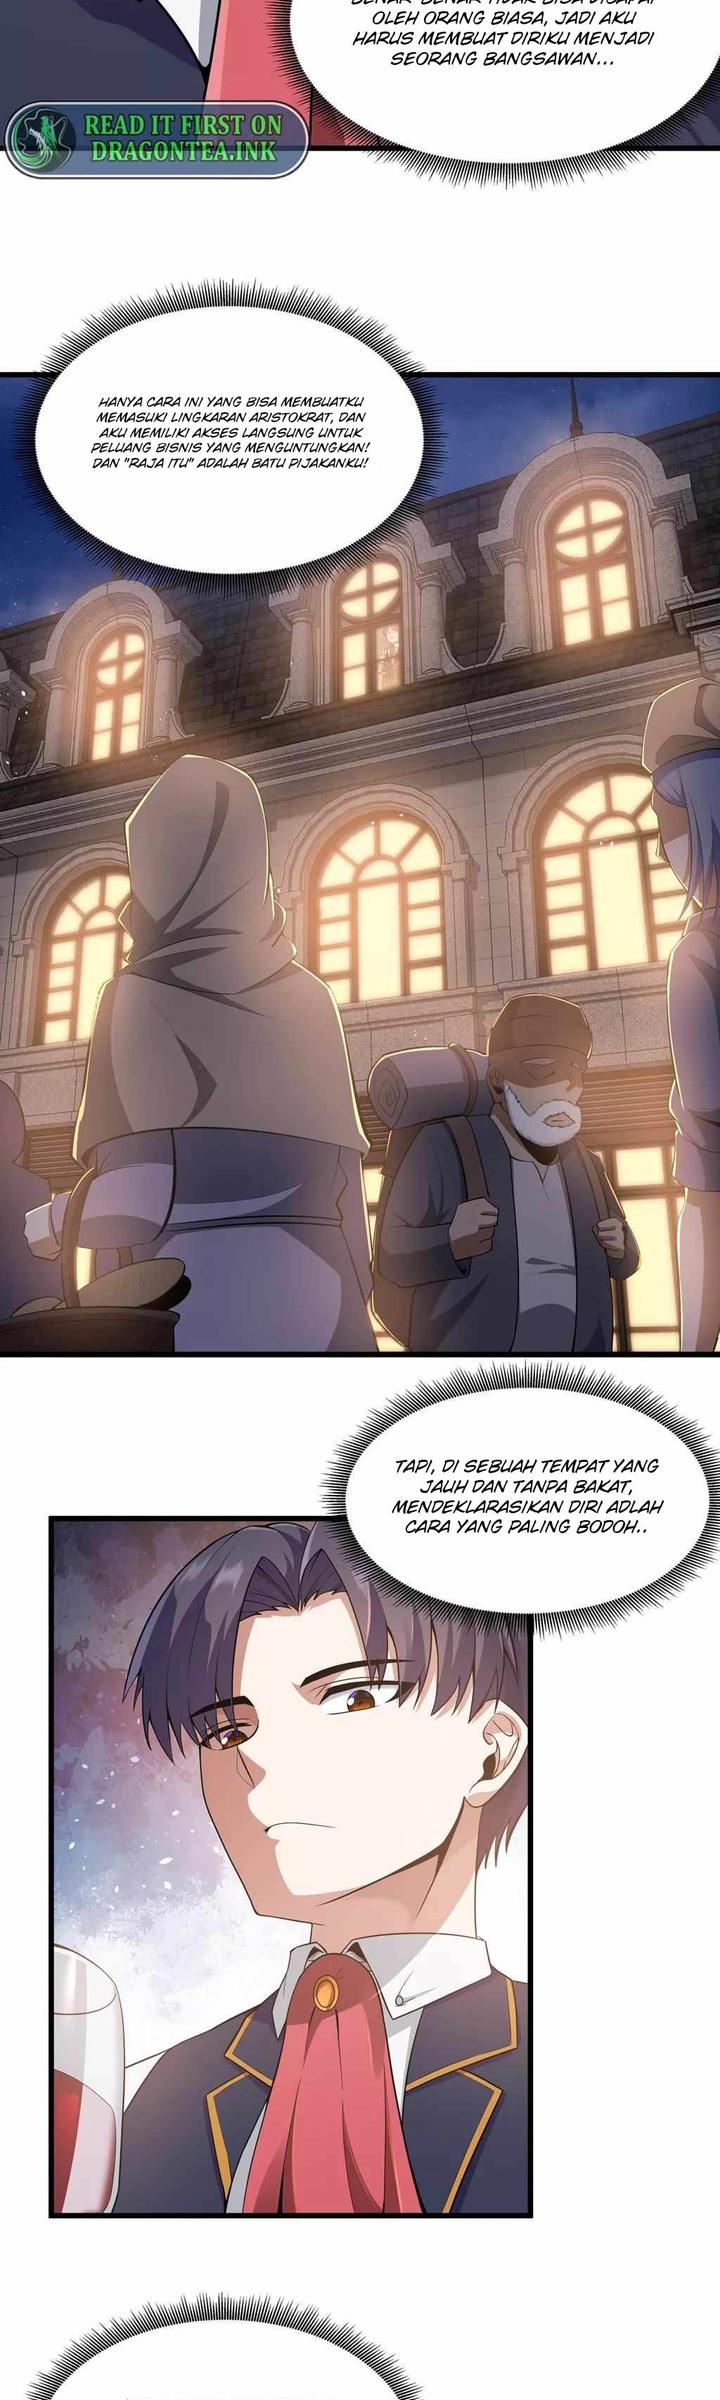 This Hero is a Money Supremacist Chapter 04